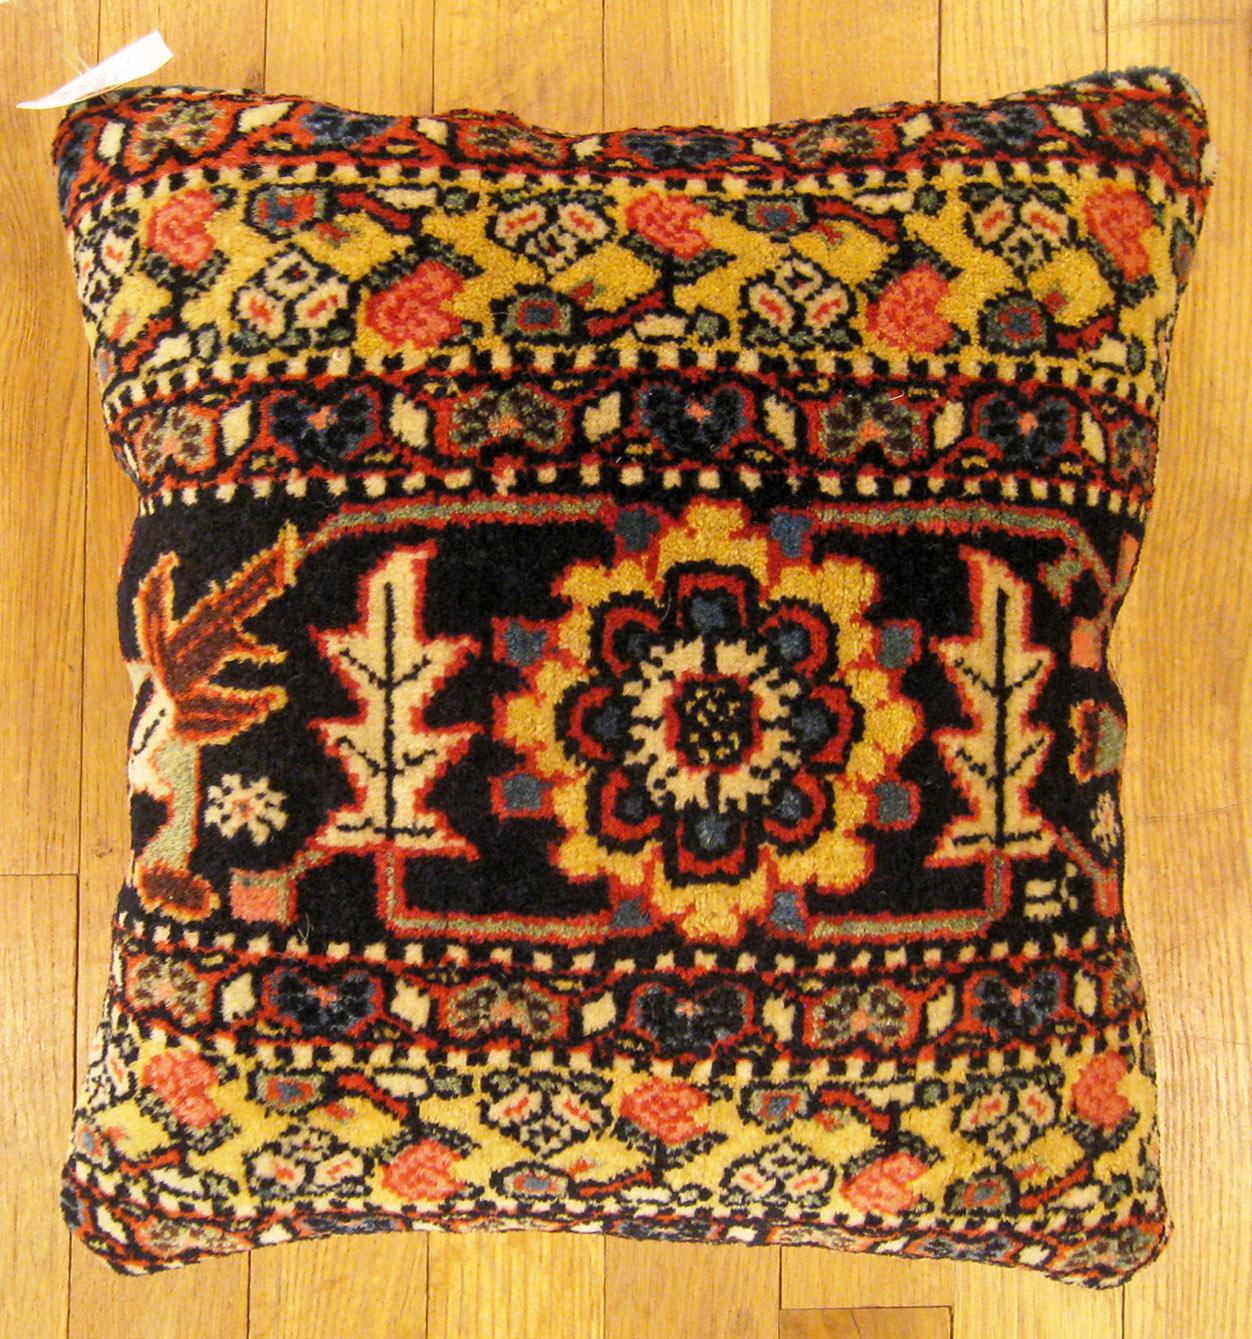 Antique Persian Bidjar carpet pillow; size 1'2” x 1'2”.

An antique decorative pillow with floral elements in a black central field, size 1'2” x 1'2”. This lovely decorative pillow features an antique fabric of a Persian Bidjar carpet on front